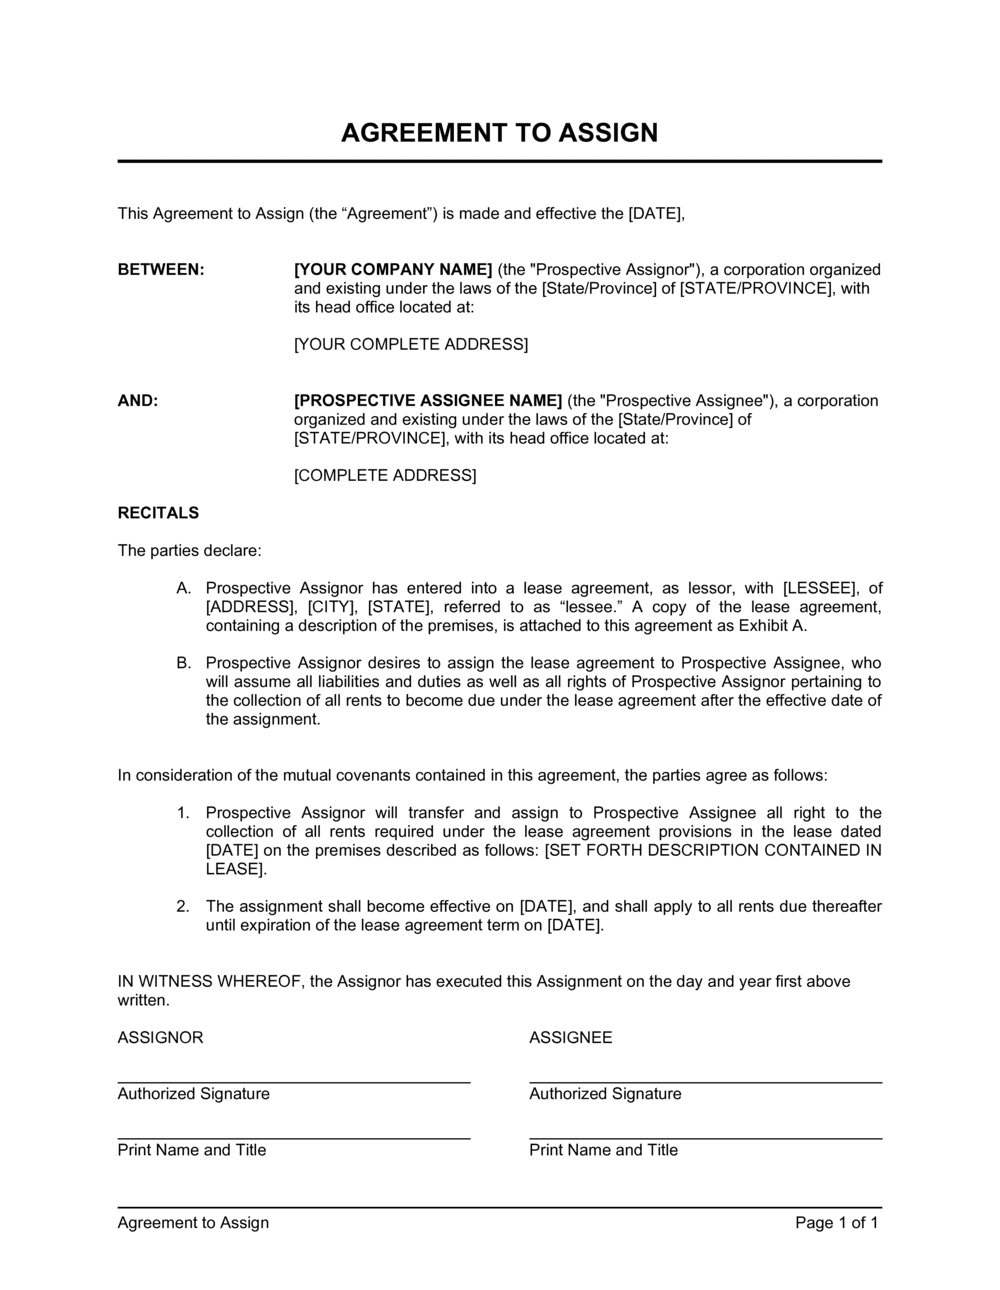 Agreement to Assign Template  by Business-in-a-Box™ In contract assignment agreement template